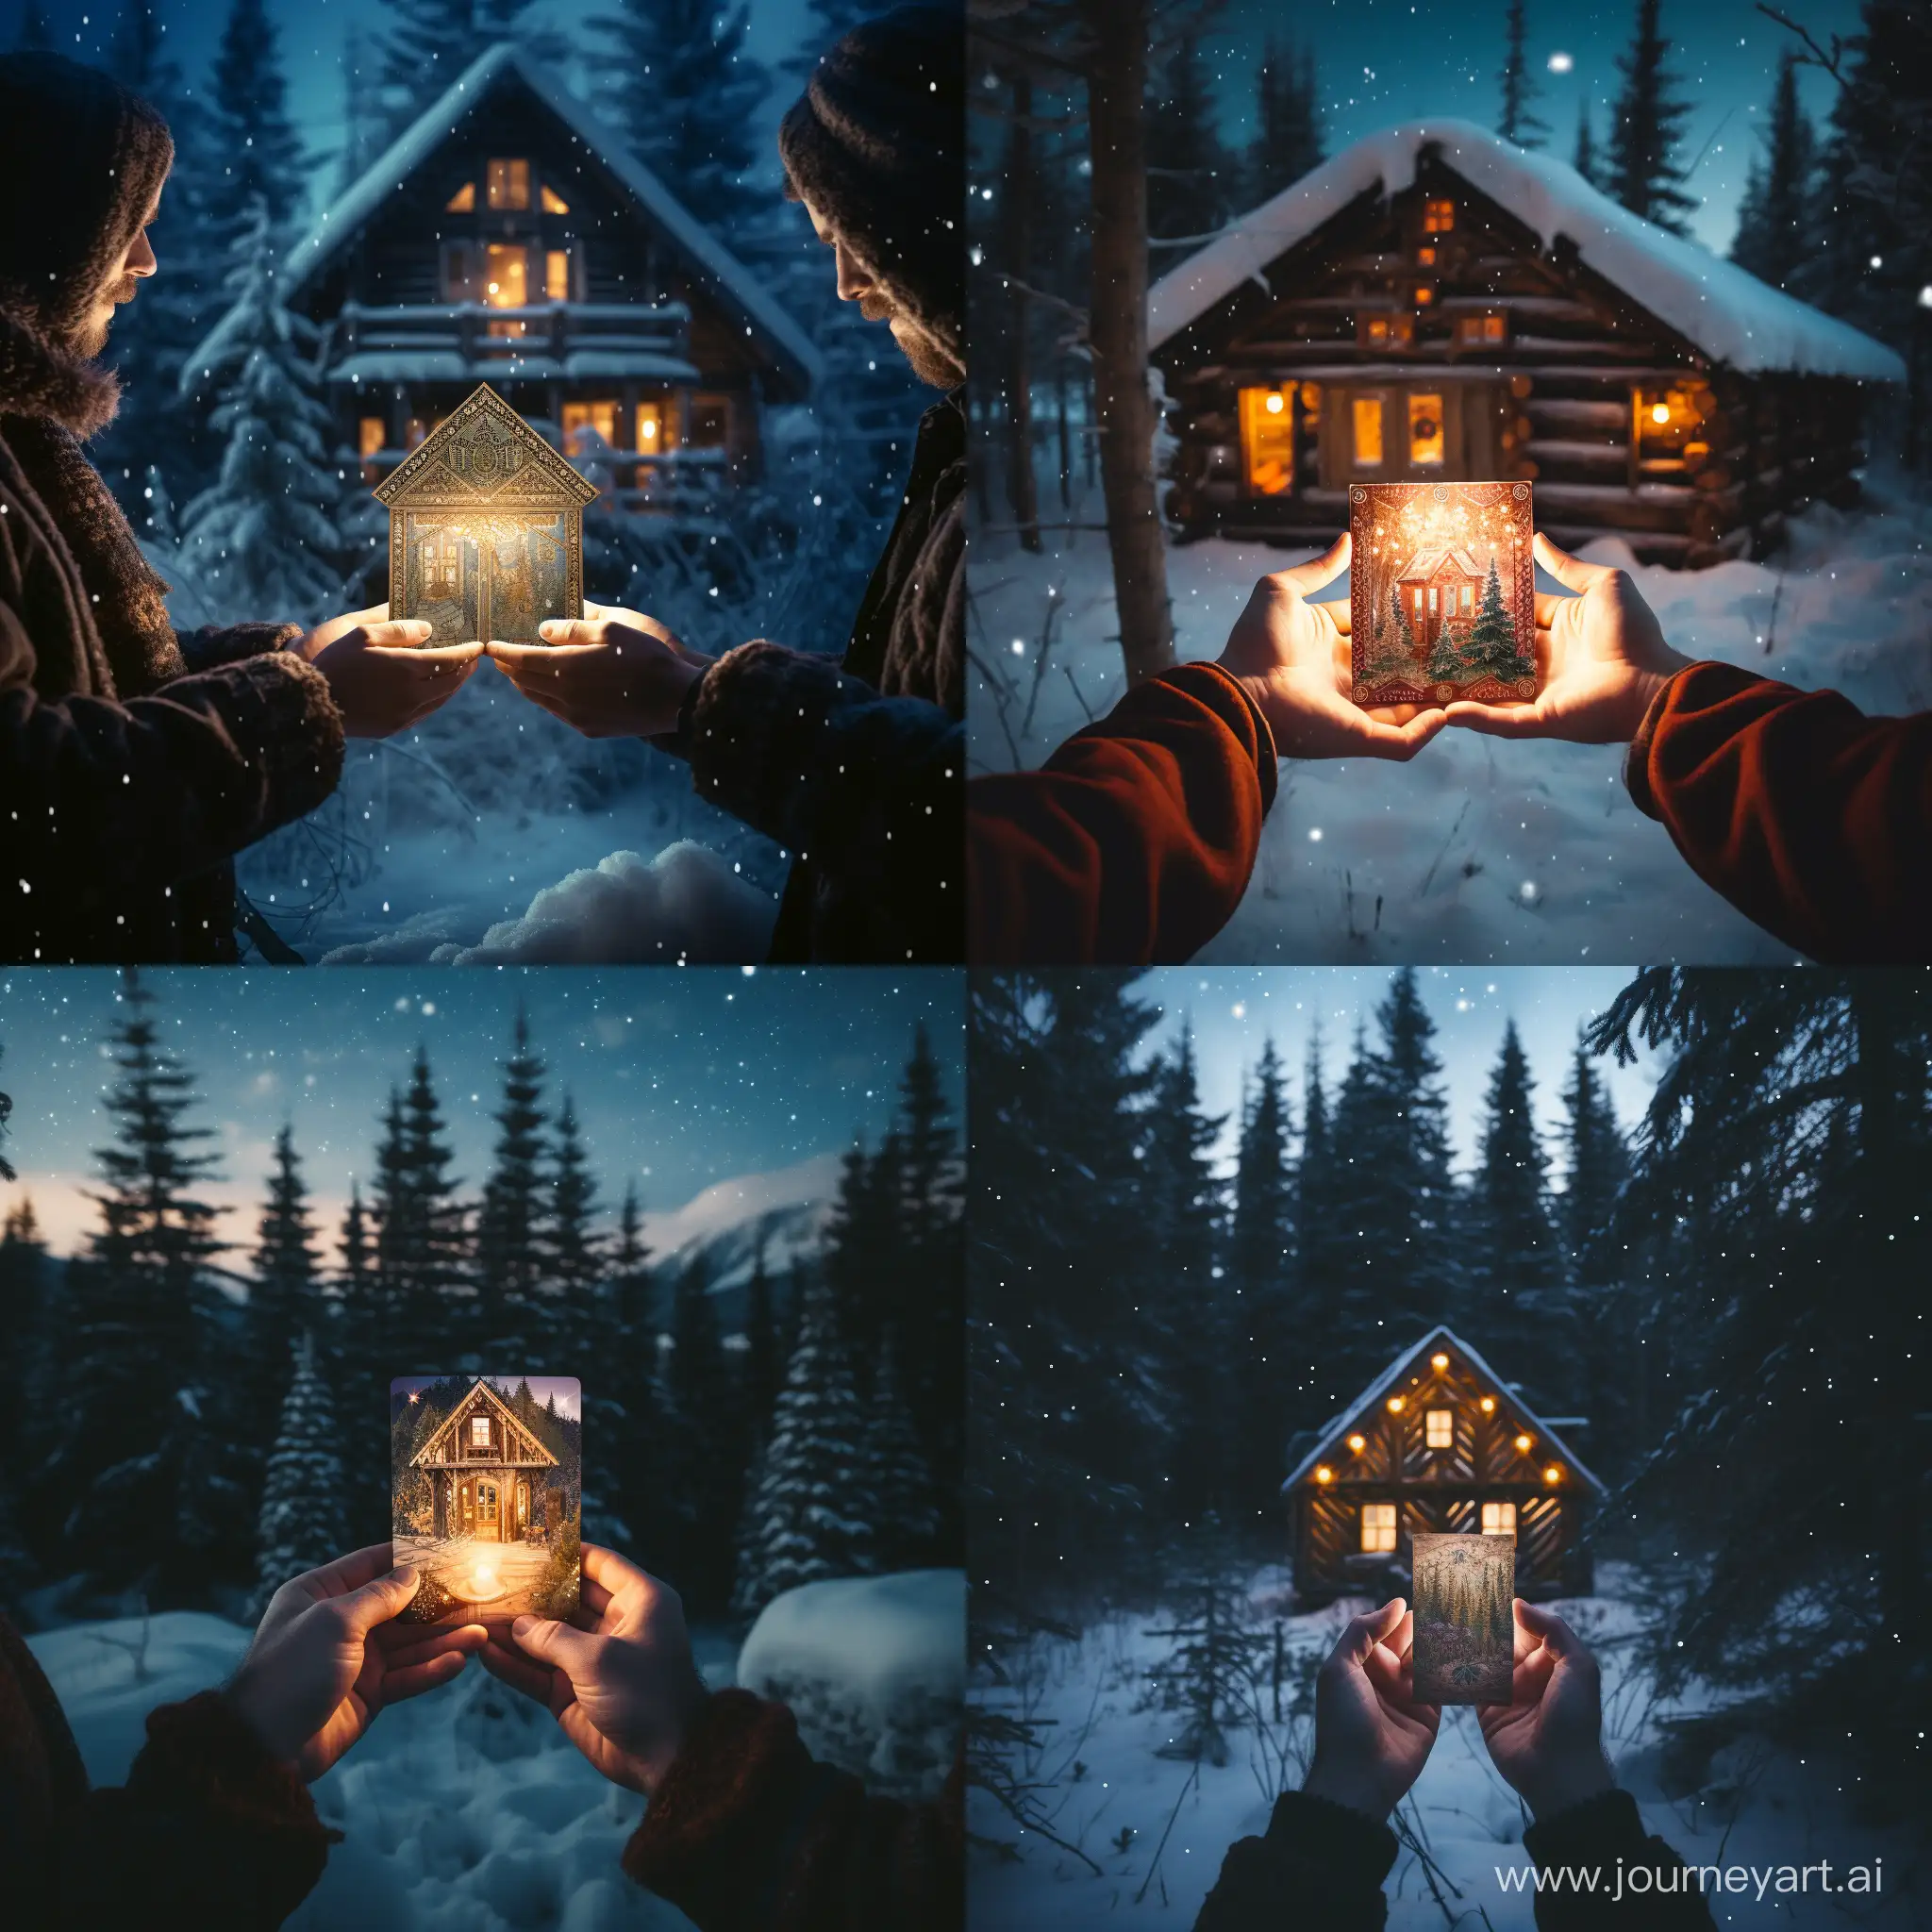 The background is a winter meadow with snow, on which a wooden house is located. Winter night with bright stars. In the foreground are the hands of a man holding tarot cards that emit a magical light. One of the cards has a spruce tree on it. flash photography, shot on Kodak Portra 